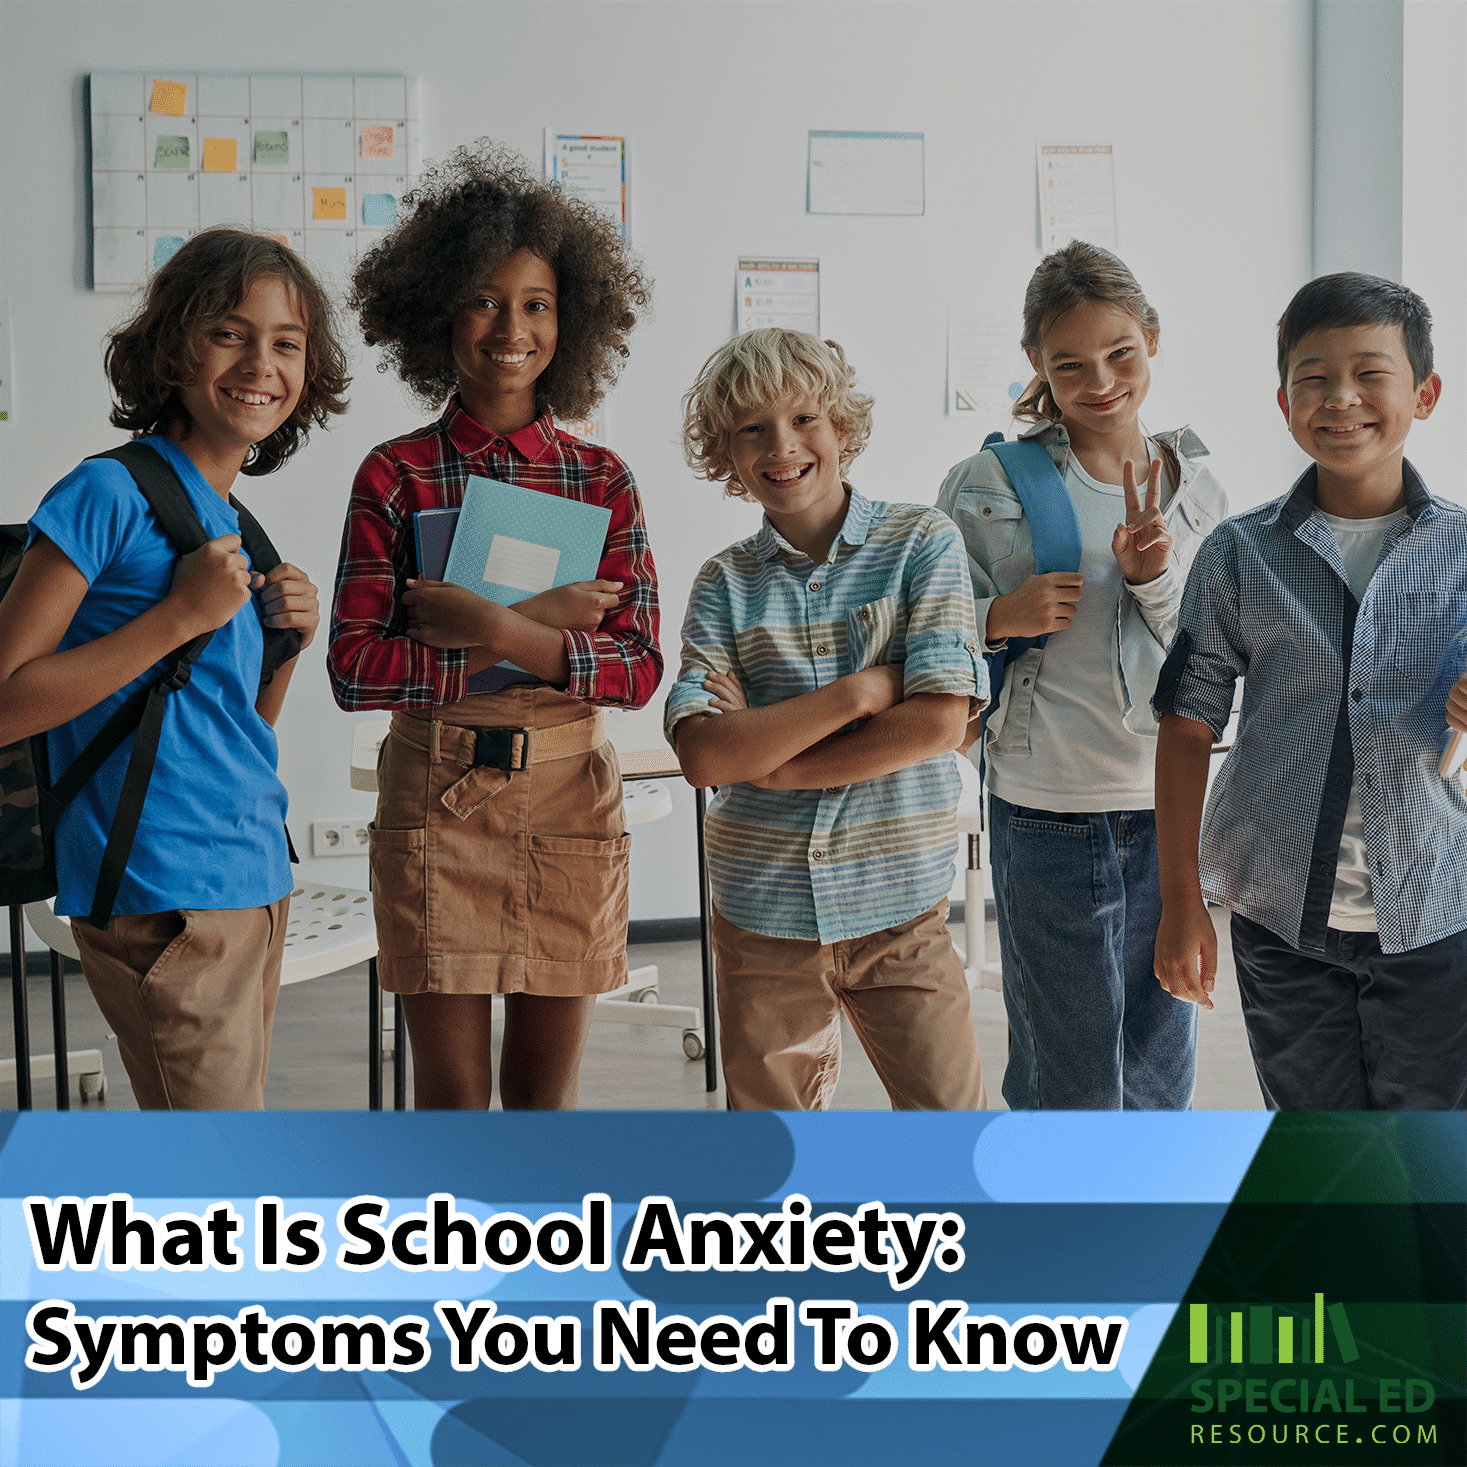 Group of children standing in a classroom not showing school anxiety symptoms.